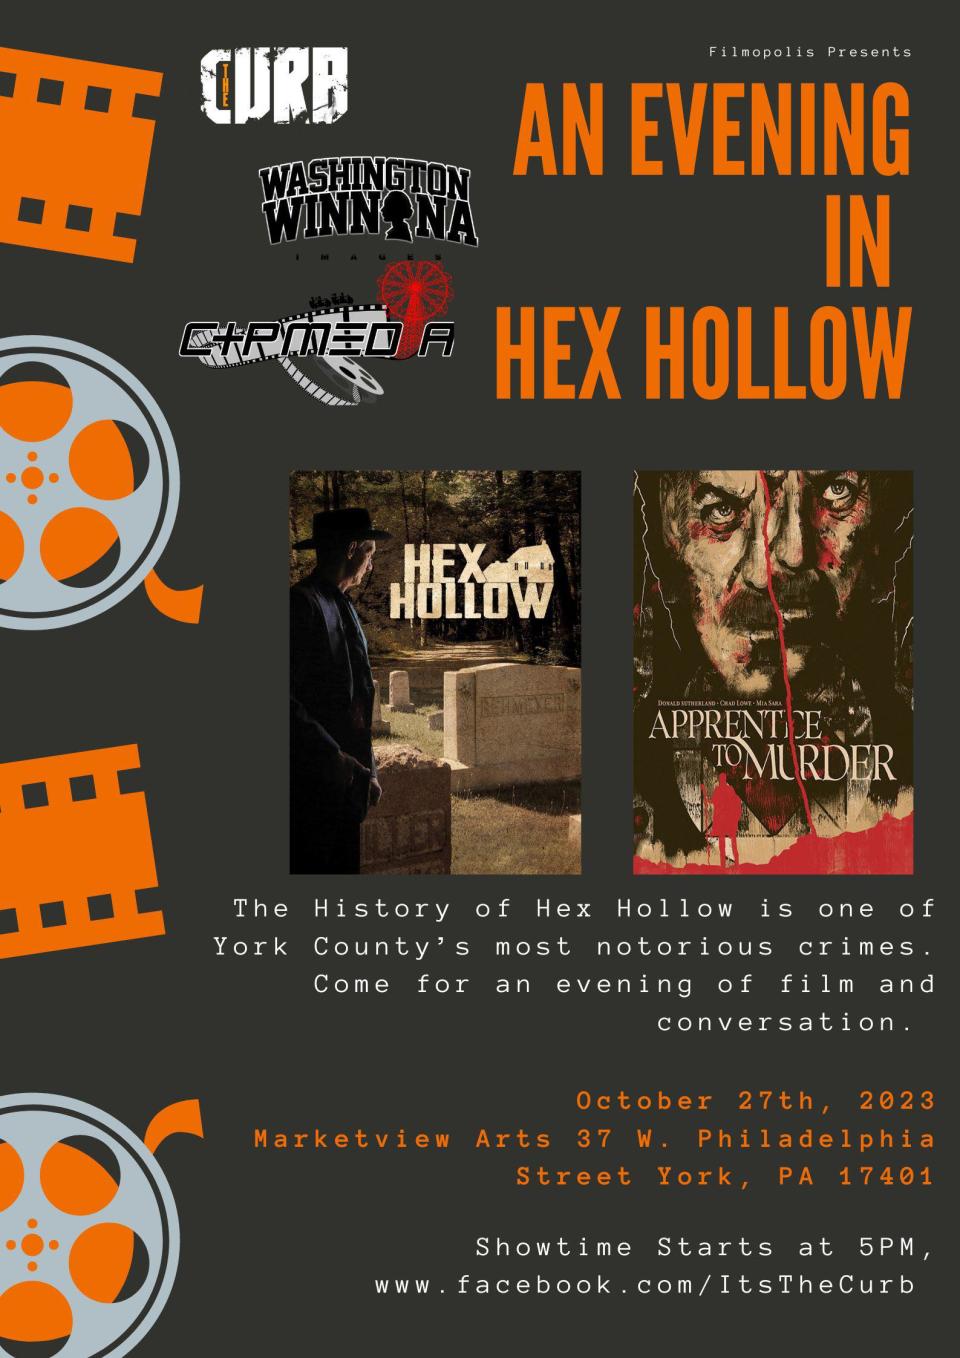 This poster promotes an upcoming “Filmopolis” event: “An Evening in Hex Hollow.” Author J. Ross McGinnis will introduce the evening.